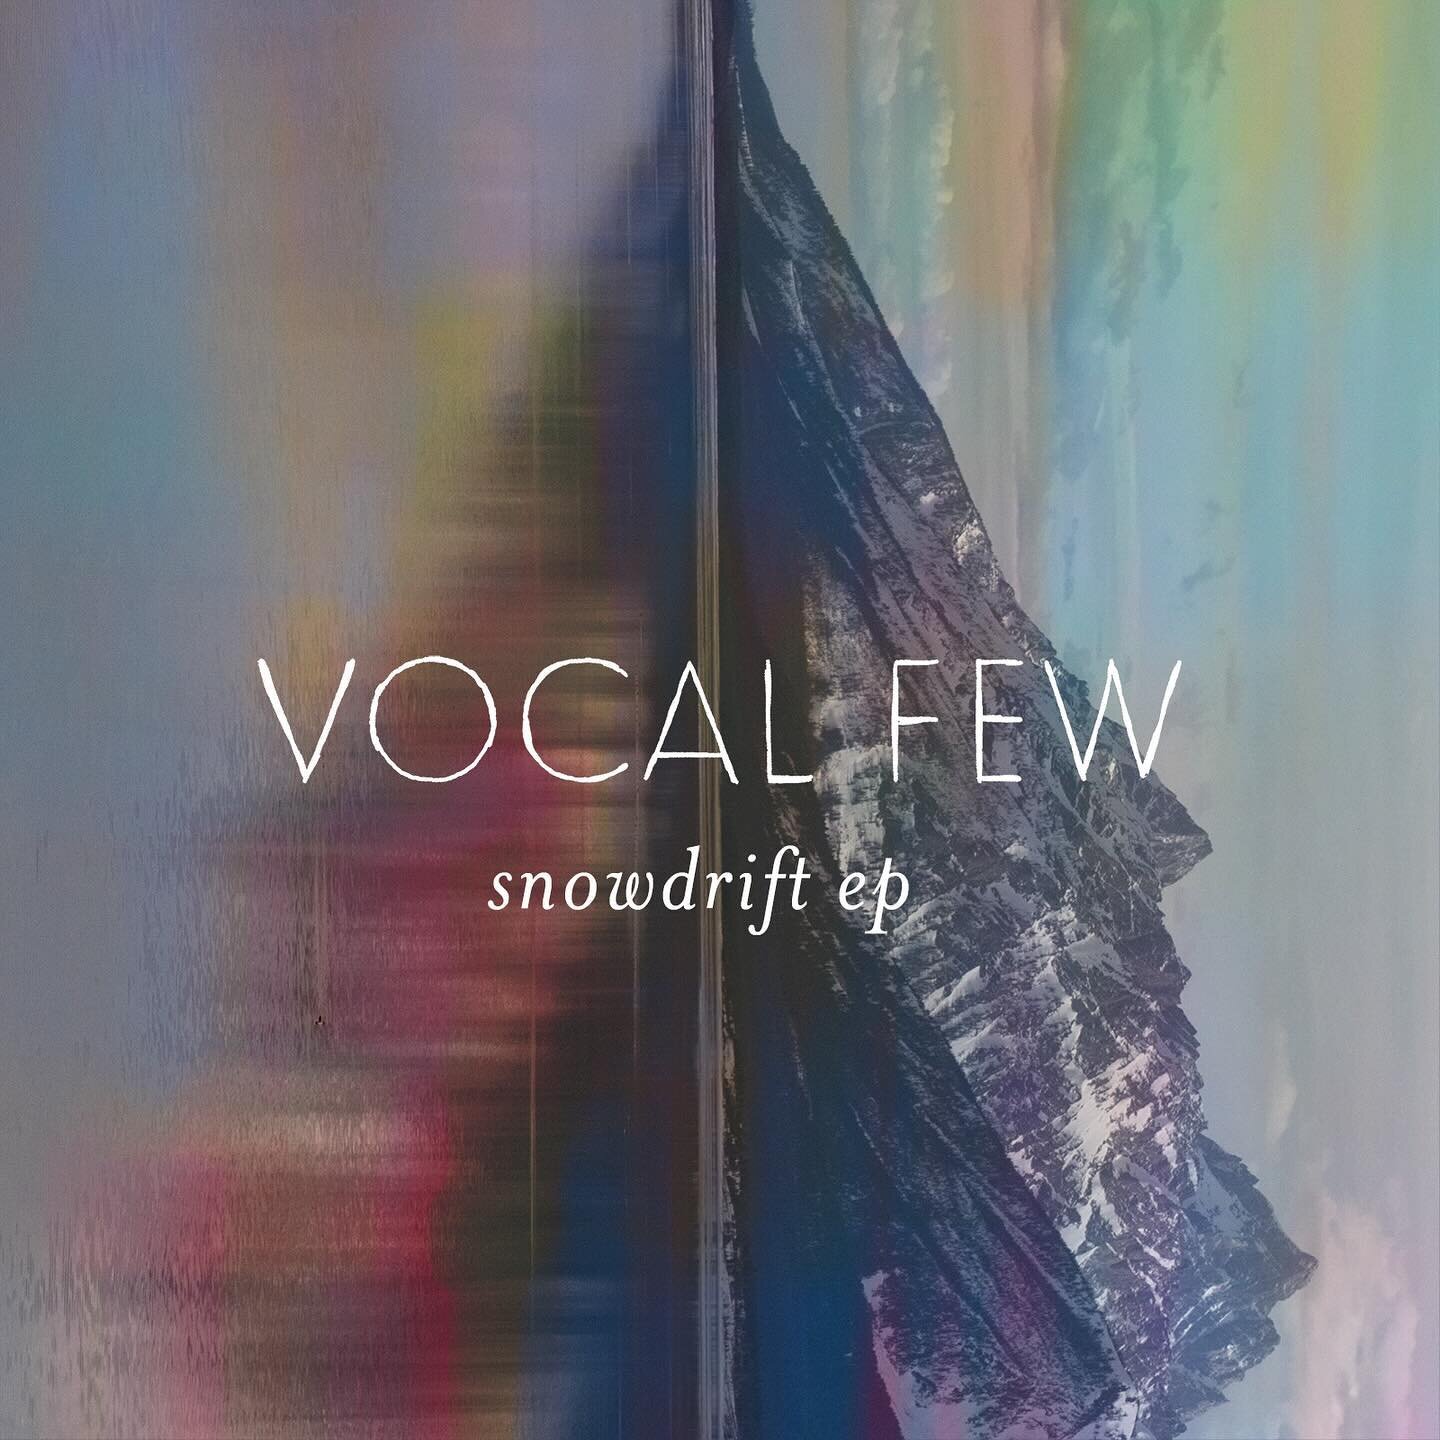 Pleasant reminder that we recorded an album of songs for the season. Kristie told me it holds up. Snowdrift your way out of 2023 in the soft, warm glow of firelight. Blissed out, empty but full, sad but happy.